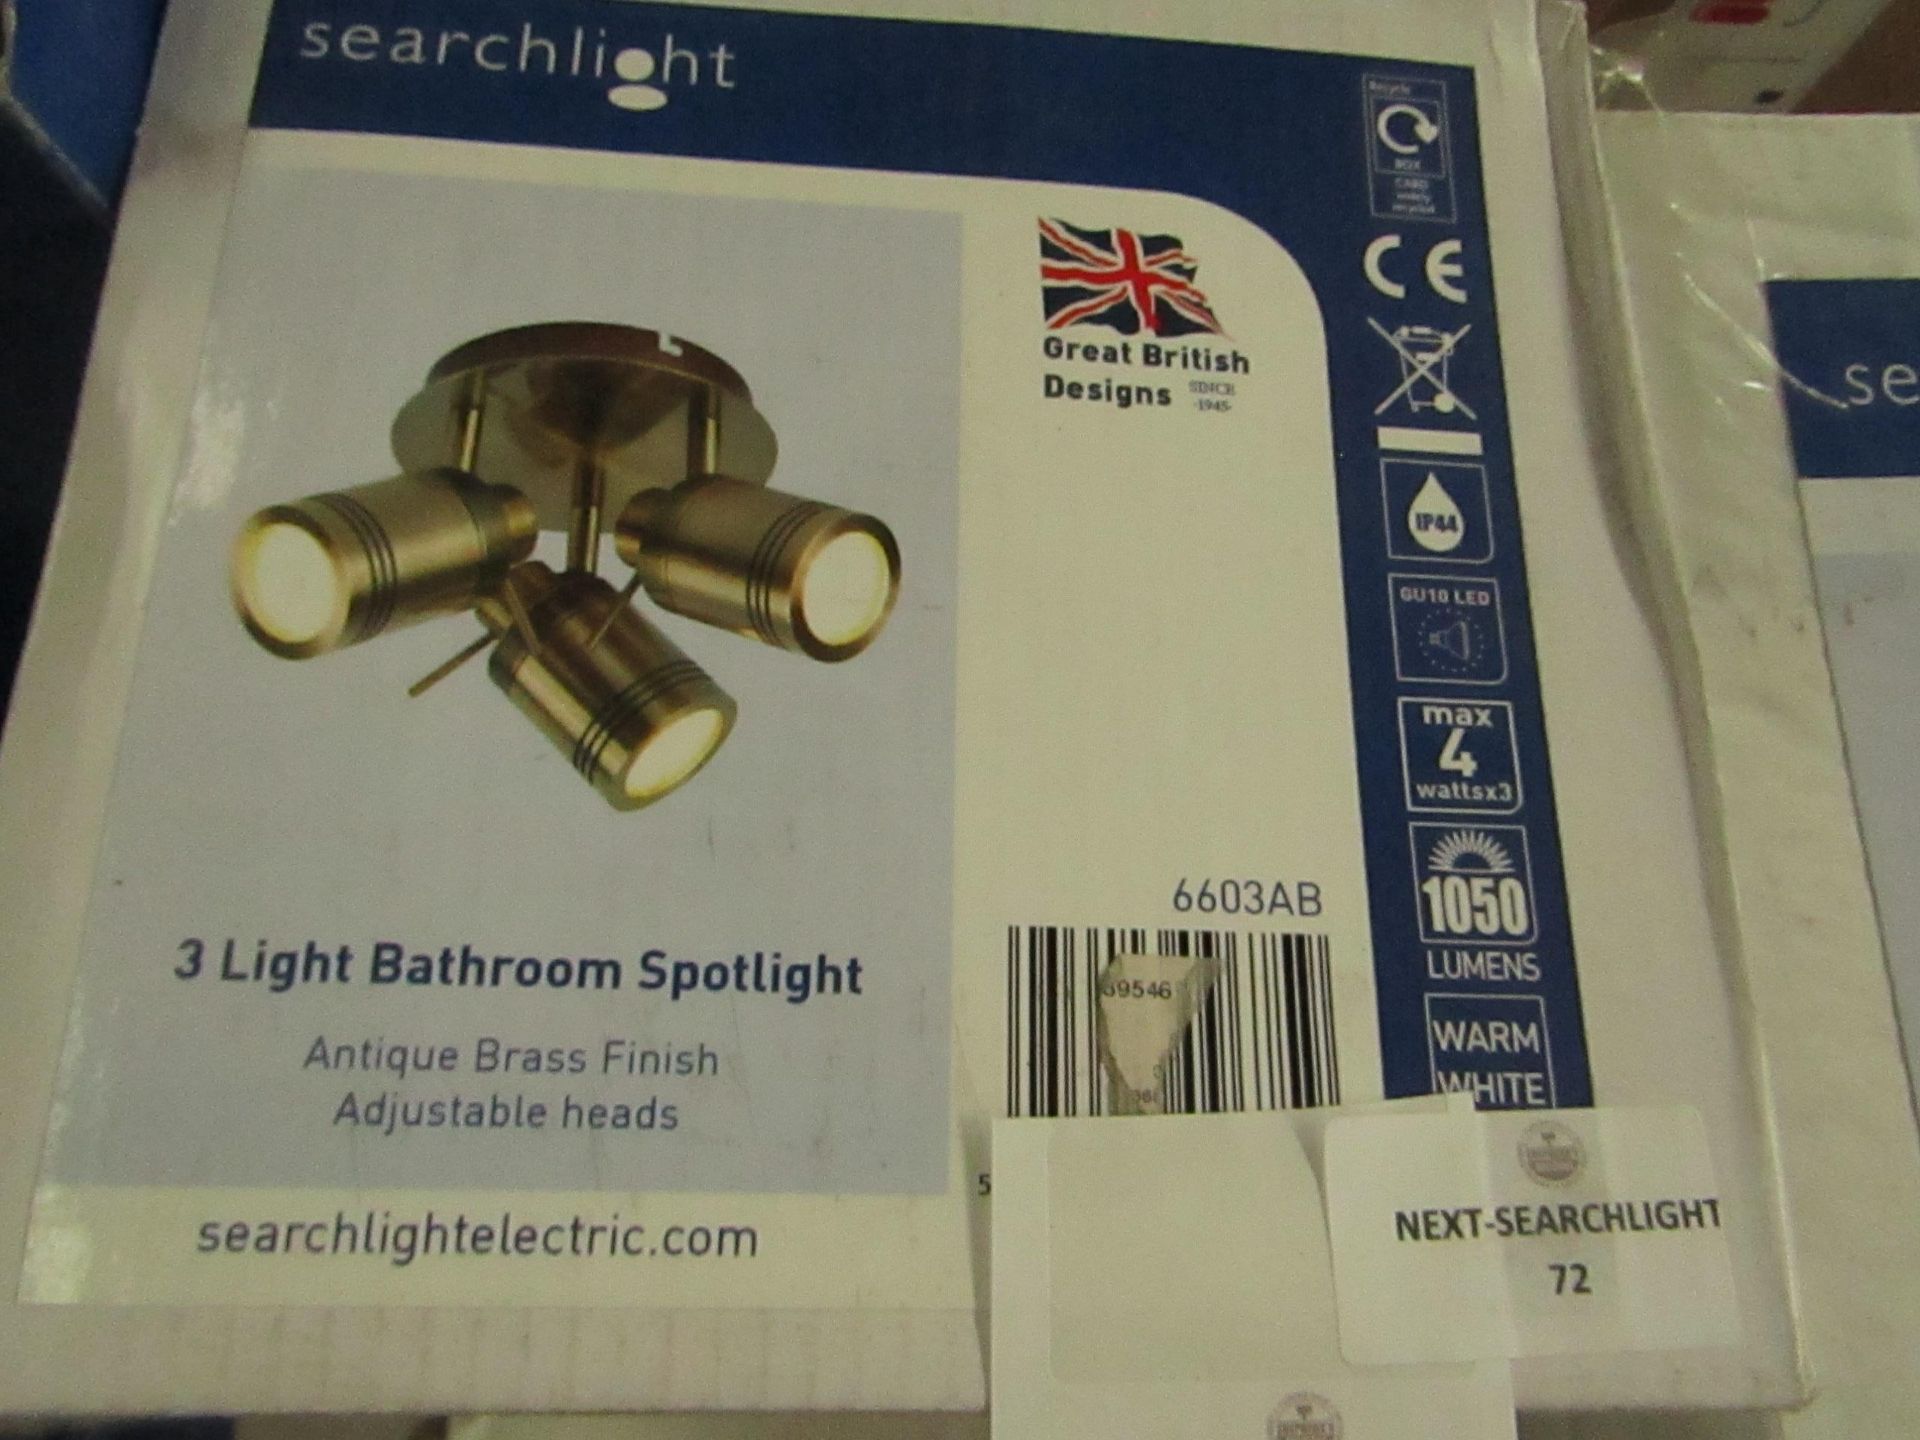 Searchlight Samson 3lt Ip44 Bathroom Spot Plate Antique Brass RRP £86.00  This lot contains unsorted - Image 2 of 2